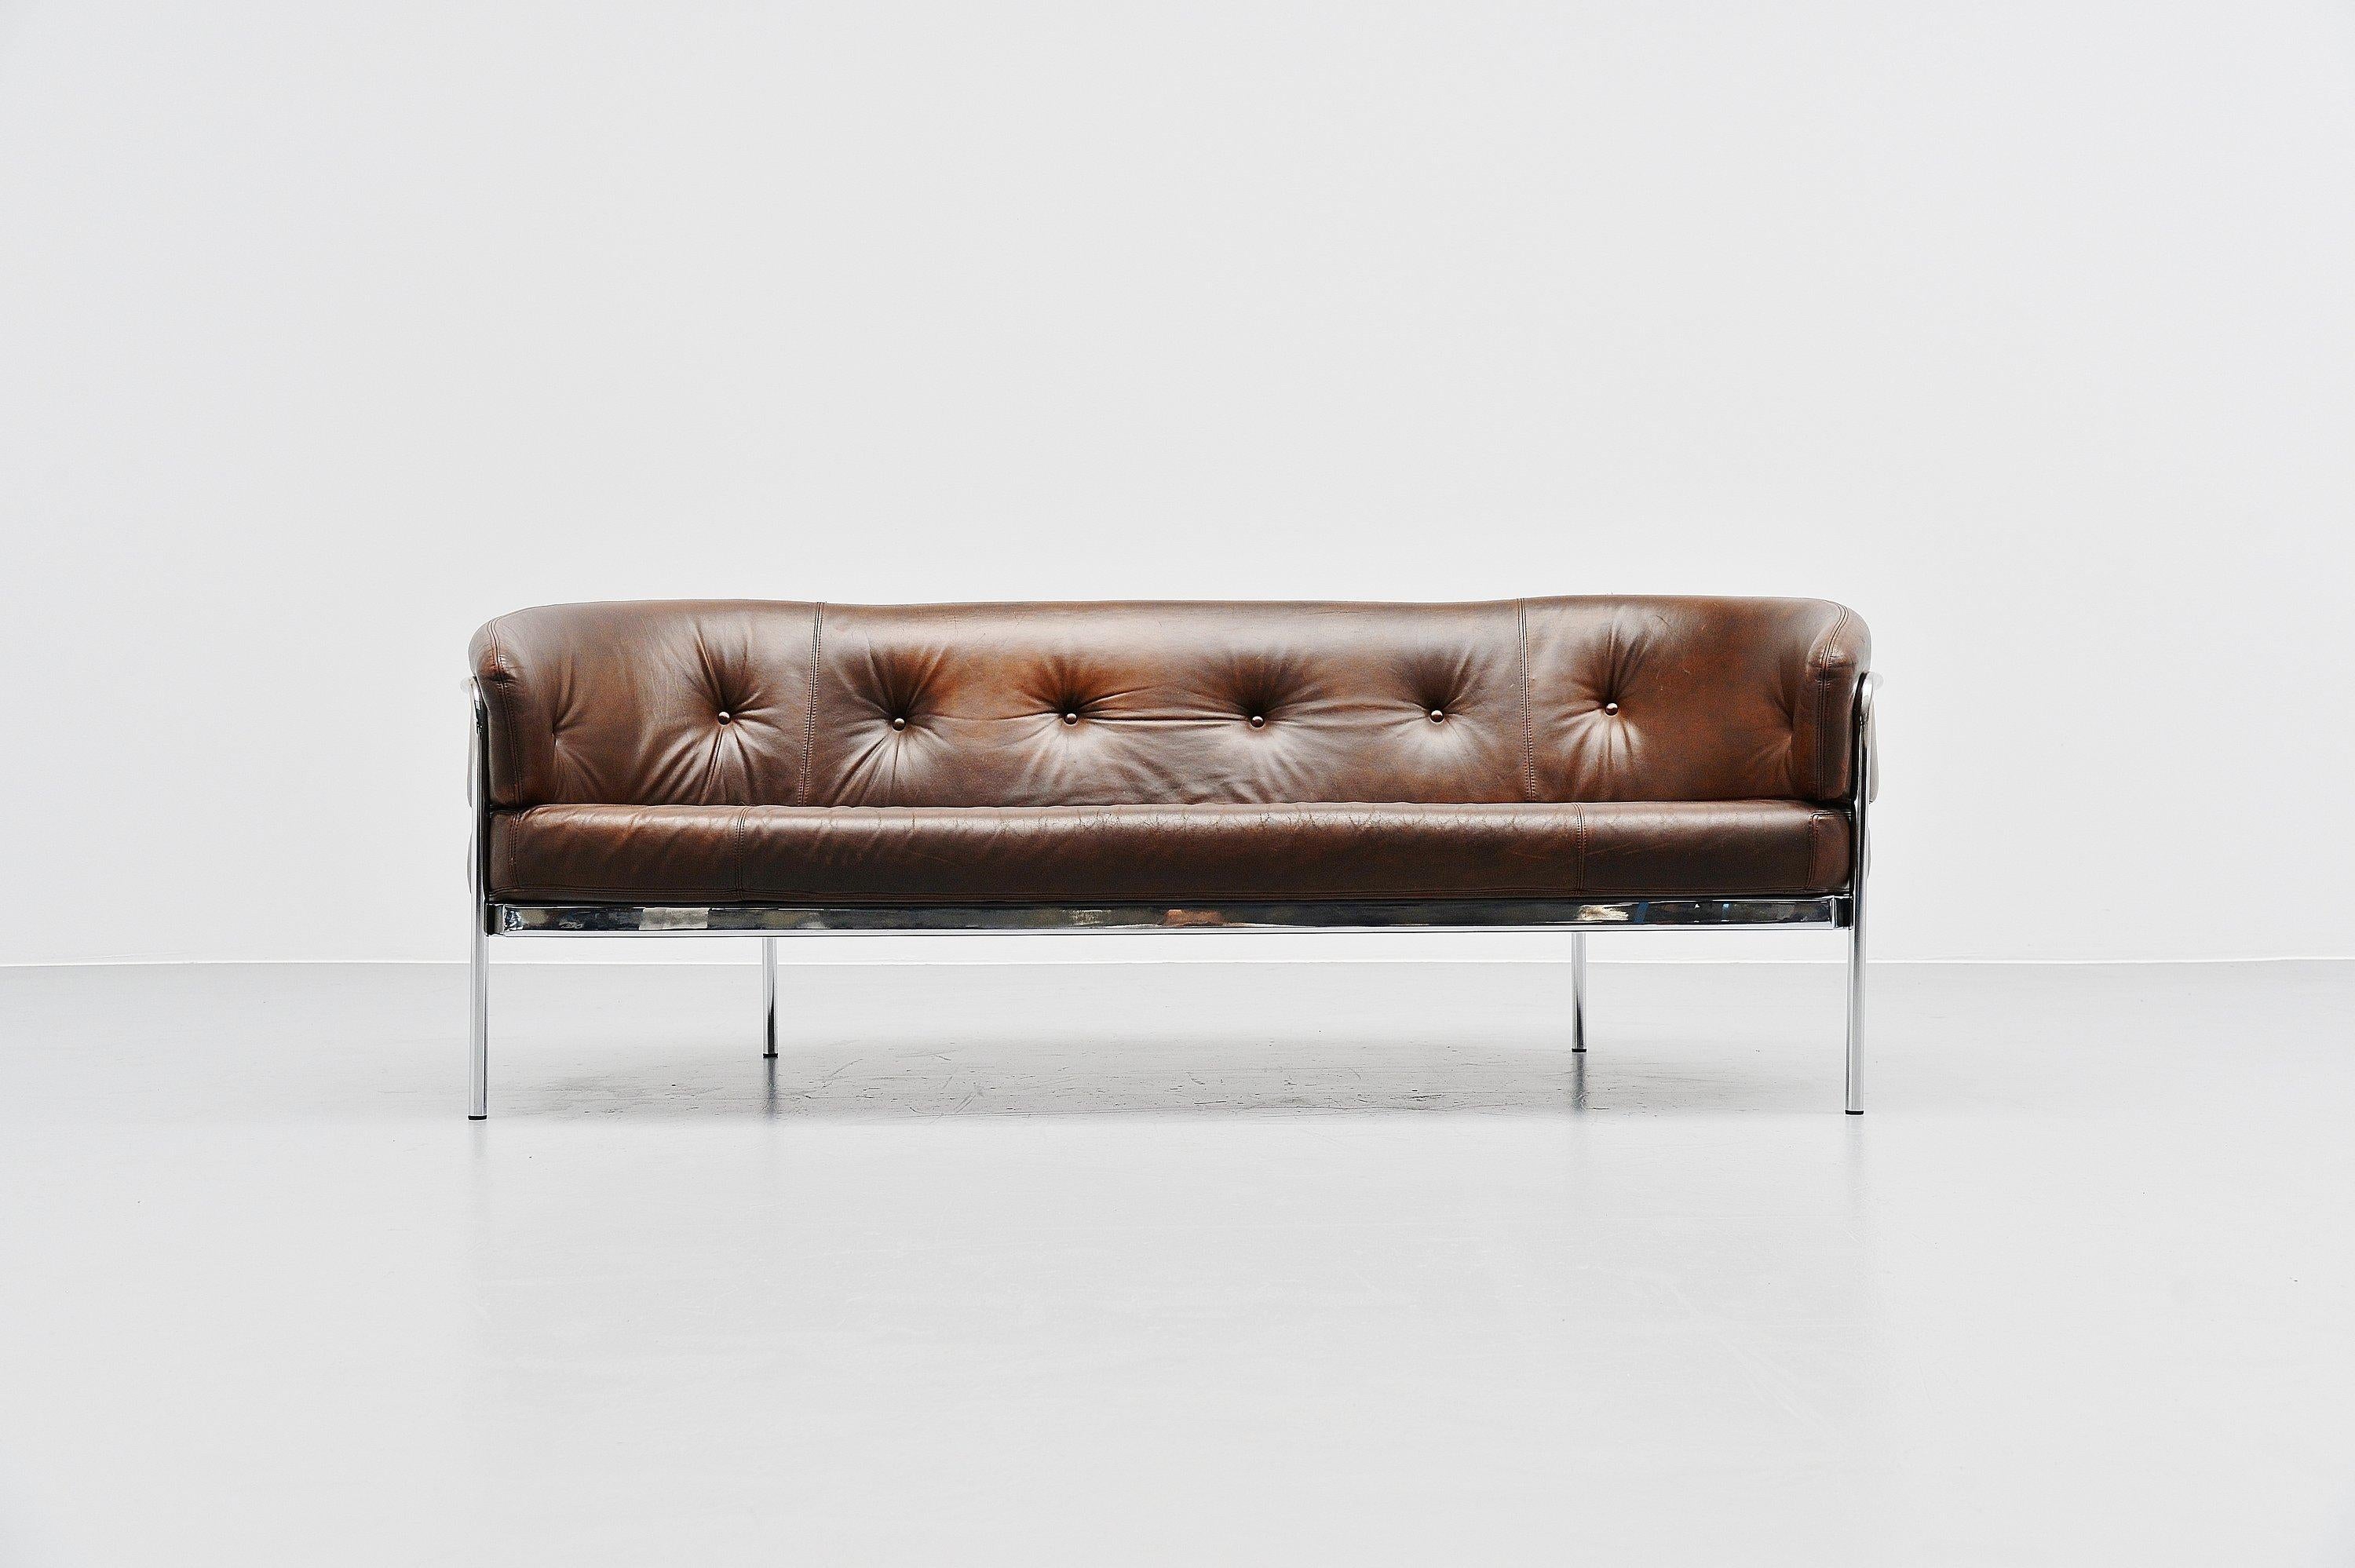 Rare small sofa model BZ19 designed by Hans Ell and manufactured by 't Spectrum, Holland, 1970. This rare sofa was only in the collection from 1970-1971 so there were not that much made. This one still has its original brown leather which has a